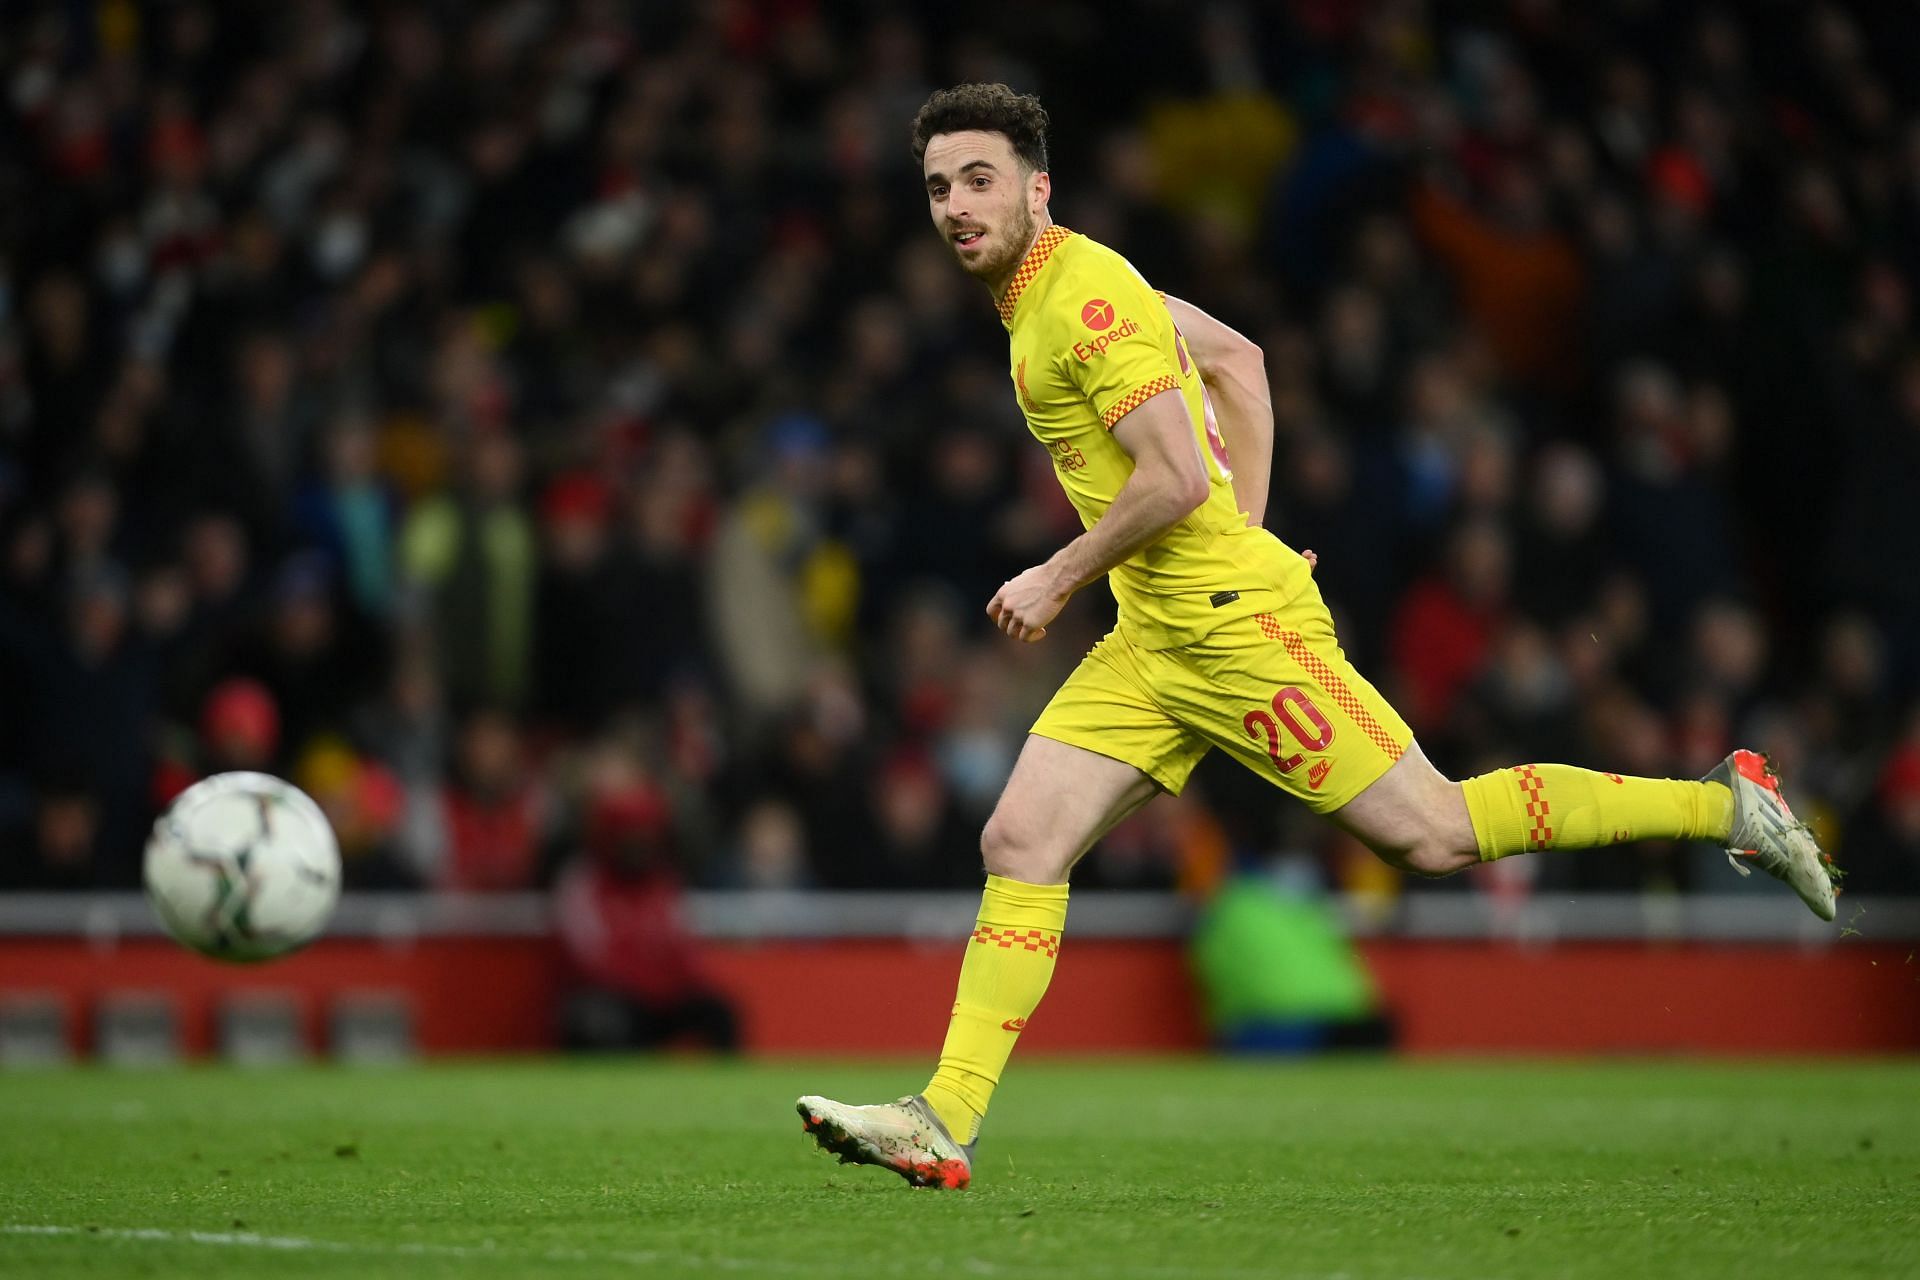 Diogo Jota has had a fine start to life at Anfield.